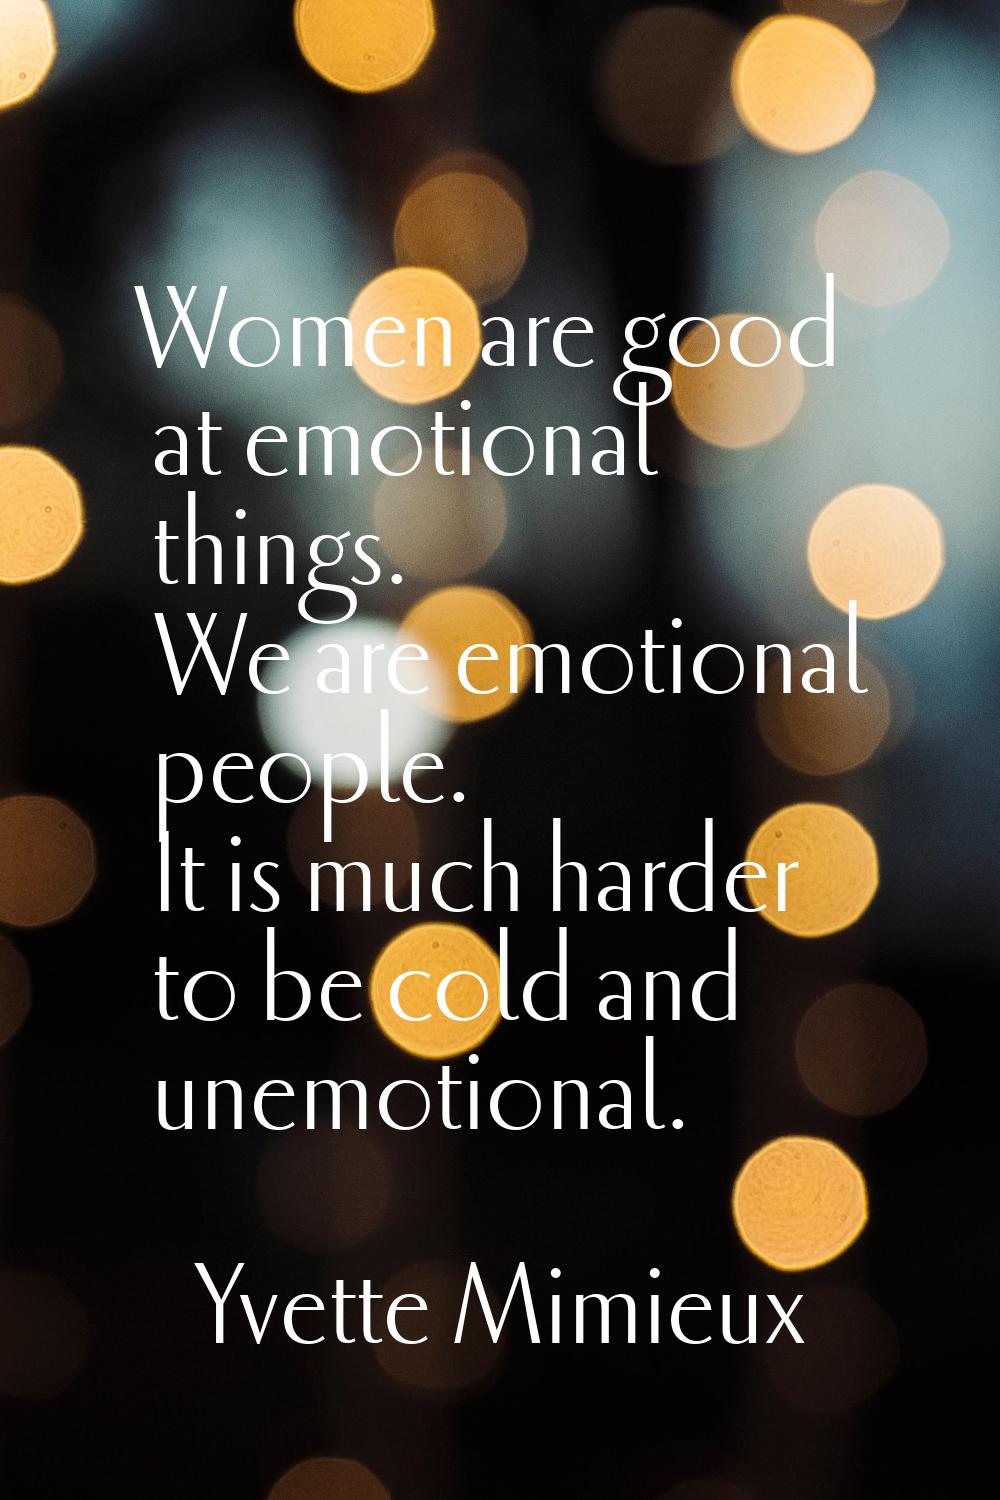 Women are good at emotional things. We are emotional people. It is much harder to be cold and unemo